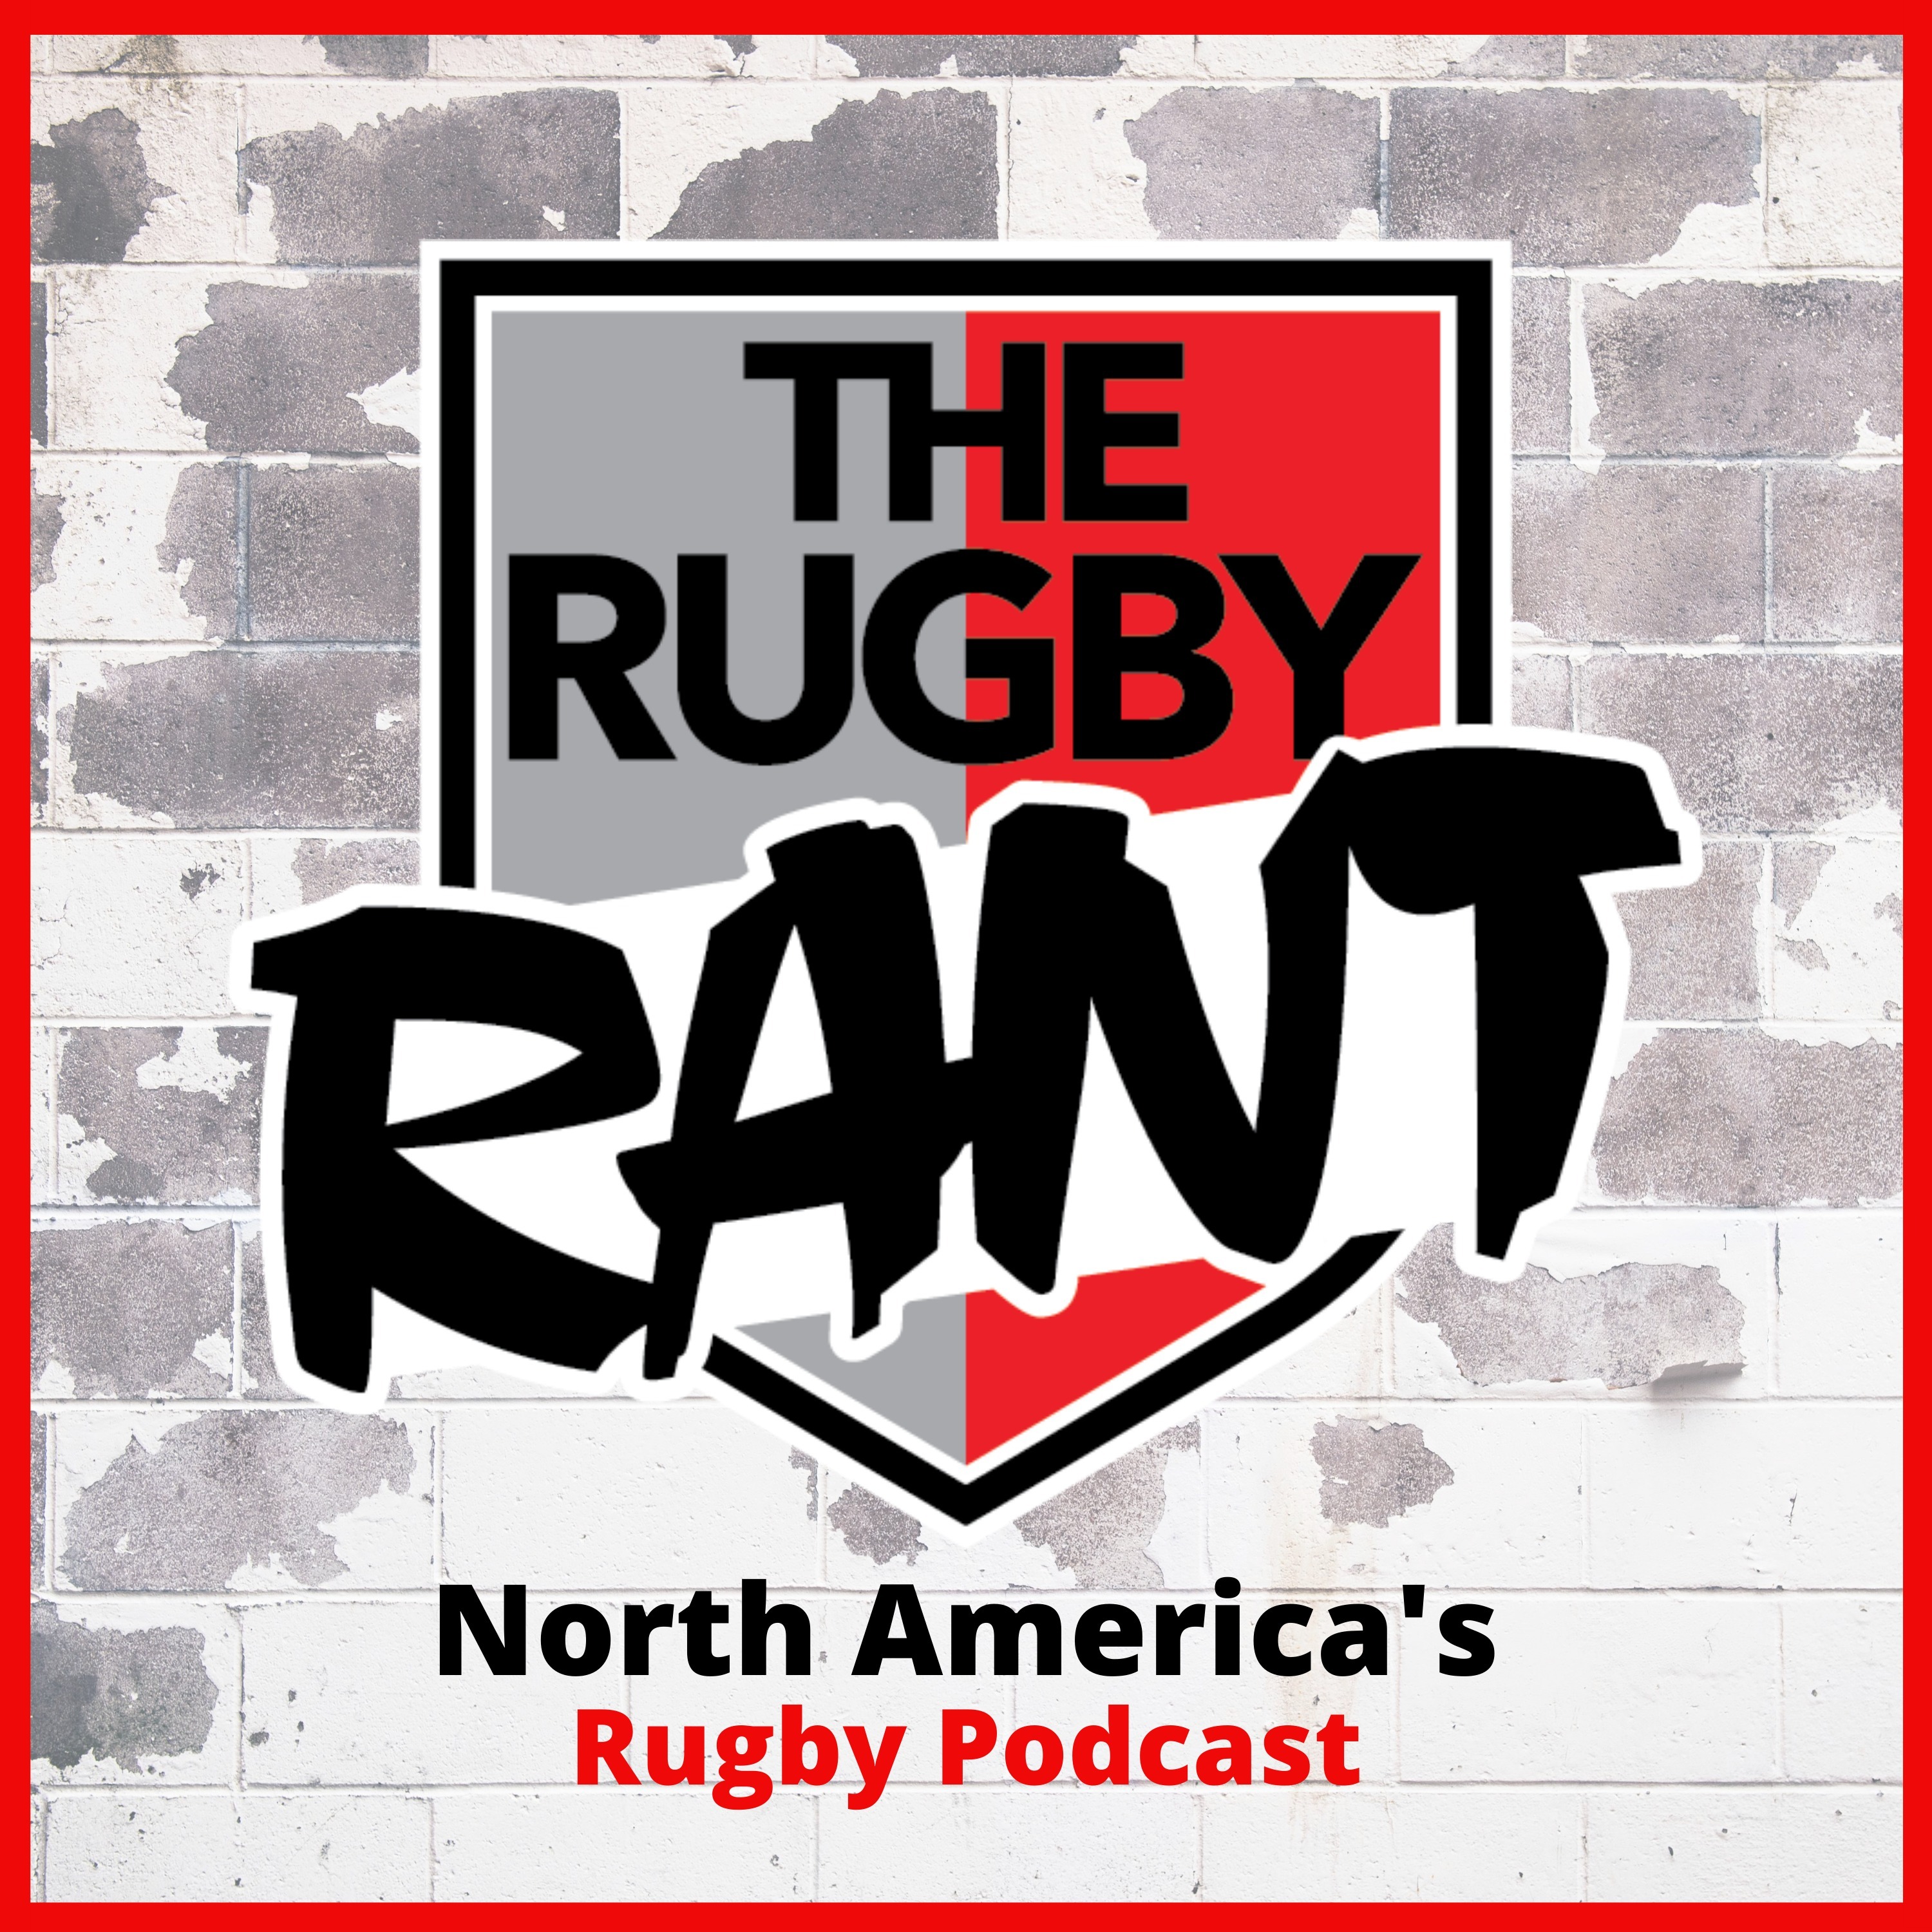 The Rugby Rant - Run, Pass or Kick with Ruben de Haas